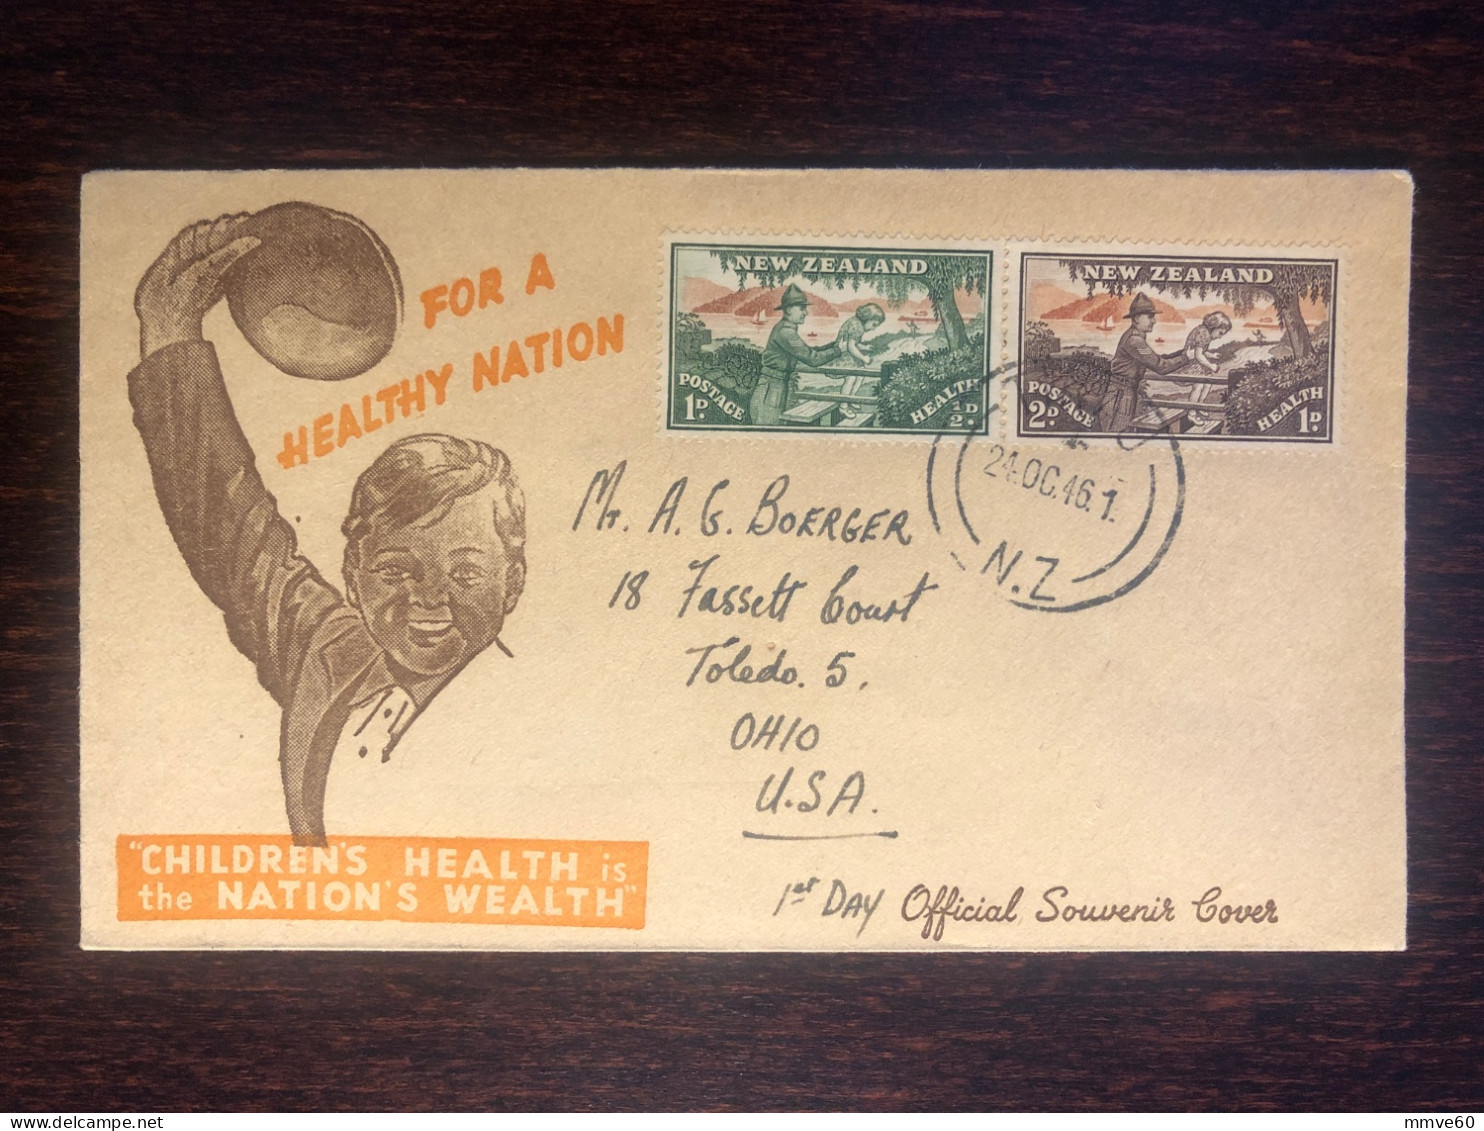 NEW ZEALAND FDC TRAVELLED COVER LETTER TO USA 1946 YEAR HEALTH MEDICINE - Covers & Documents